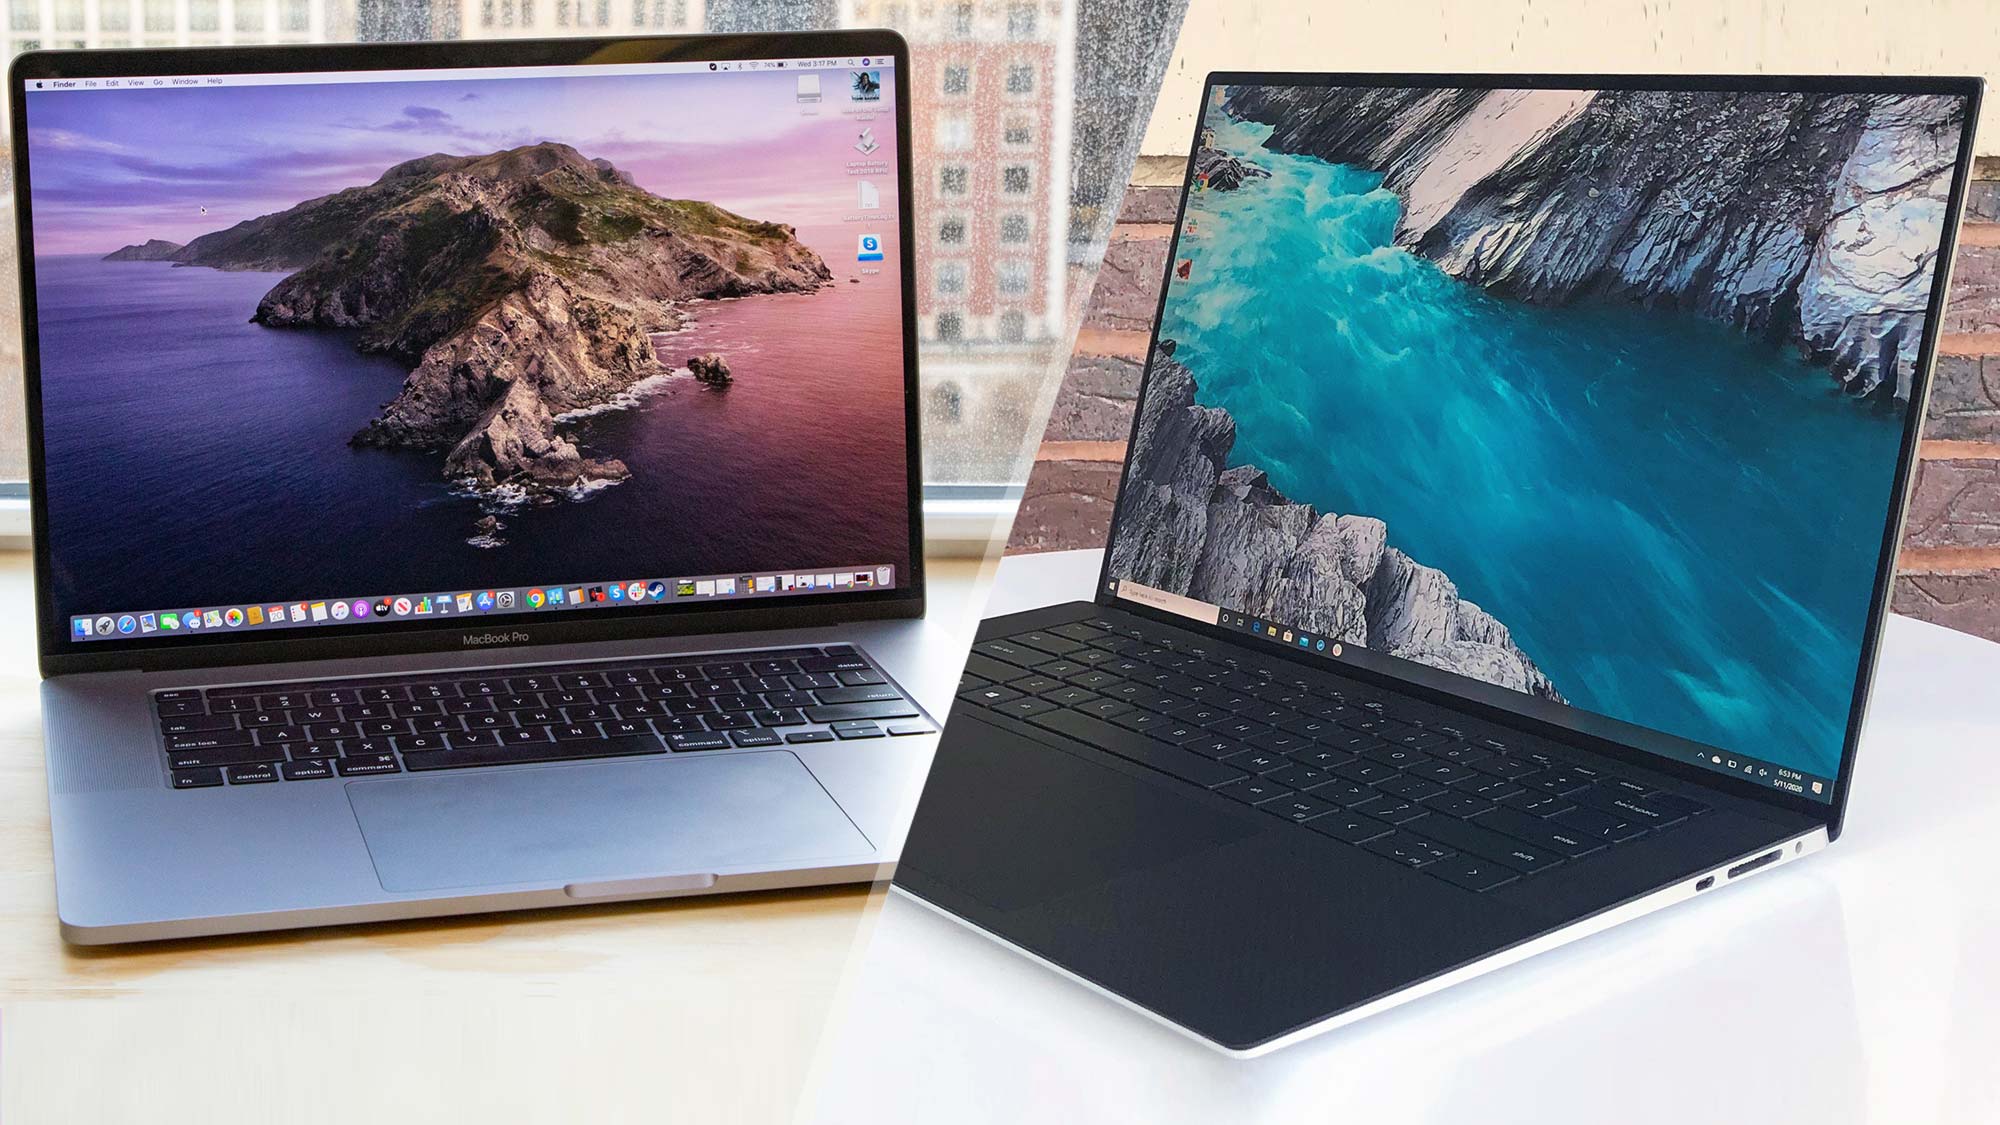 Dell XPS 15 (2020) vs. MacBook Pro 16-inch: Which laptop wins? | Tom's Guide